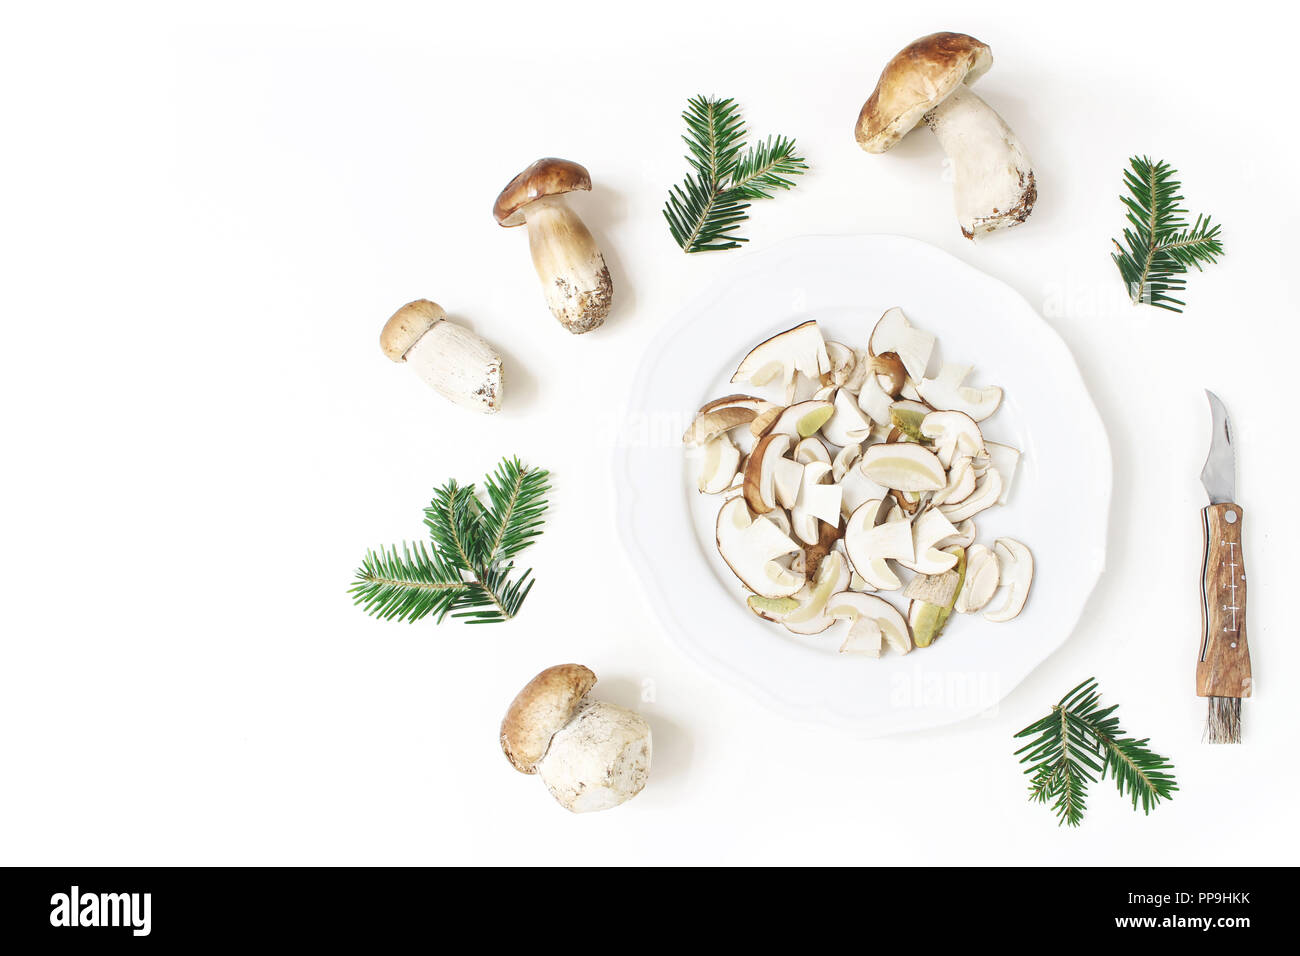 Autumn styled food arrangement. Composition of whole and sliced porcino mushrooms, Boletus edulis on white plate, fir branches and pocket knife. White table background. Fall design, flat lay, top view Stock Photo